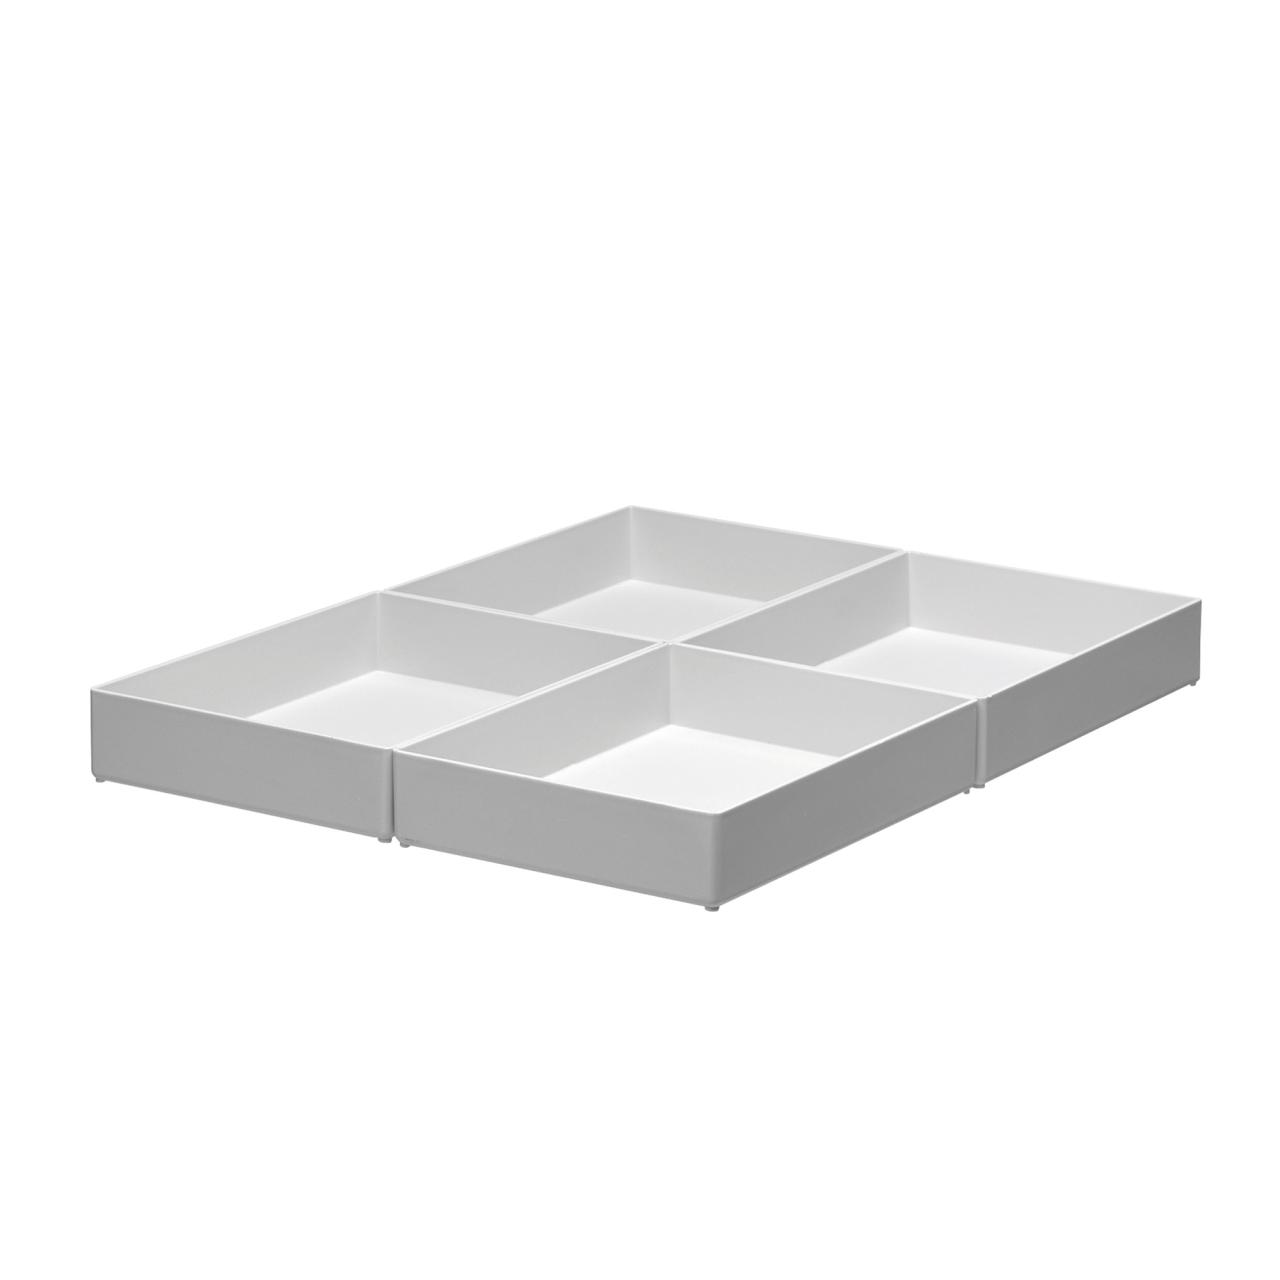 Insert Boxes, semi-high, 4 boxes per drawer, 1 compartment